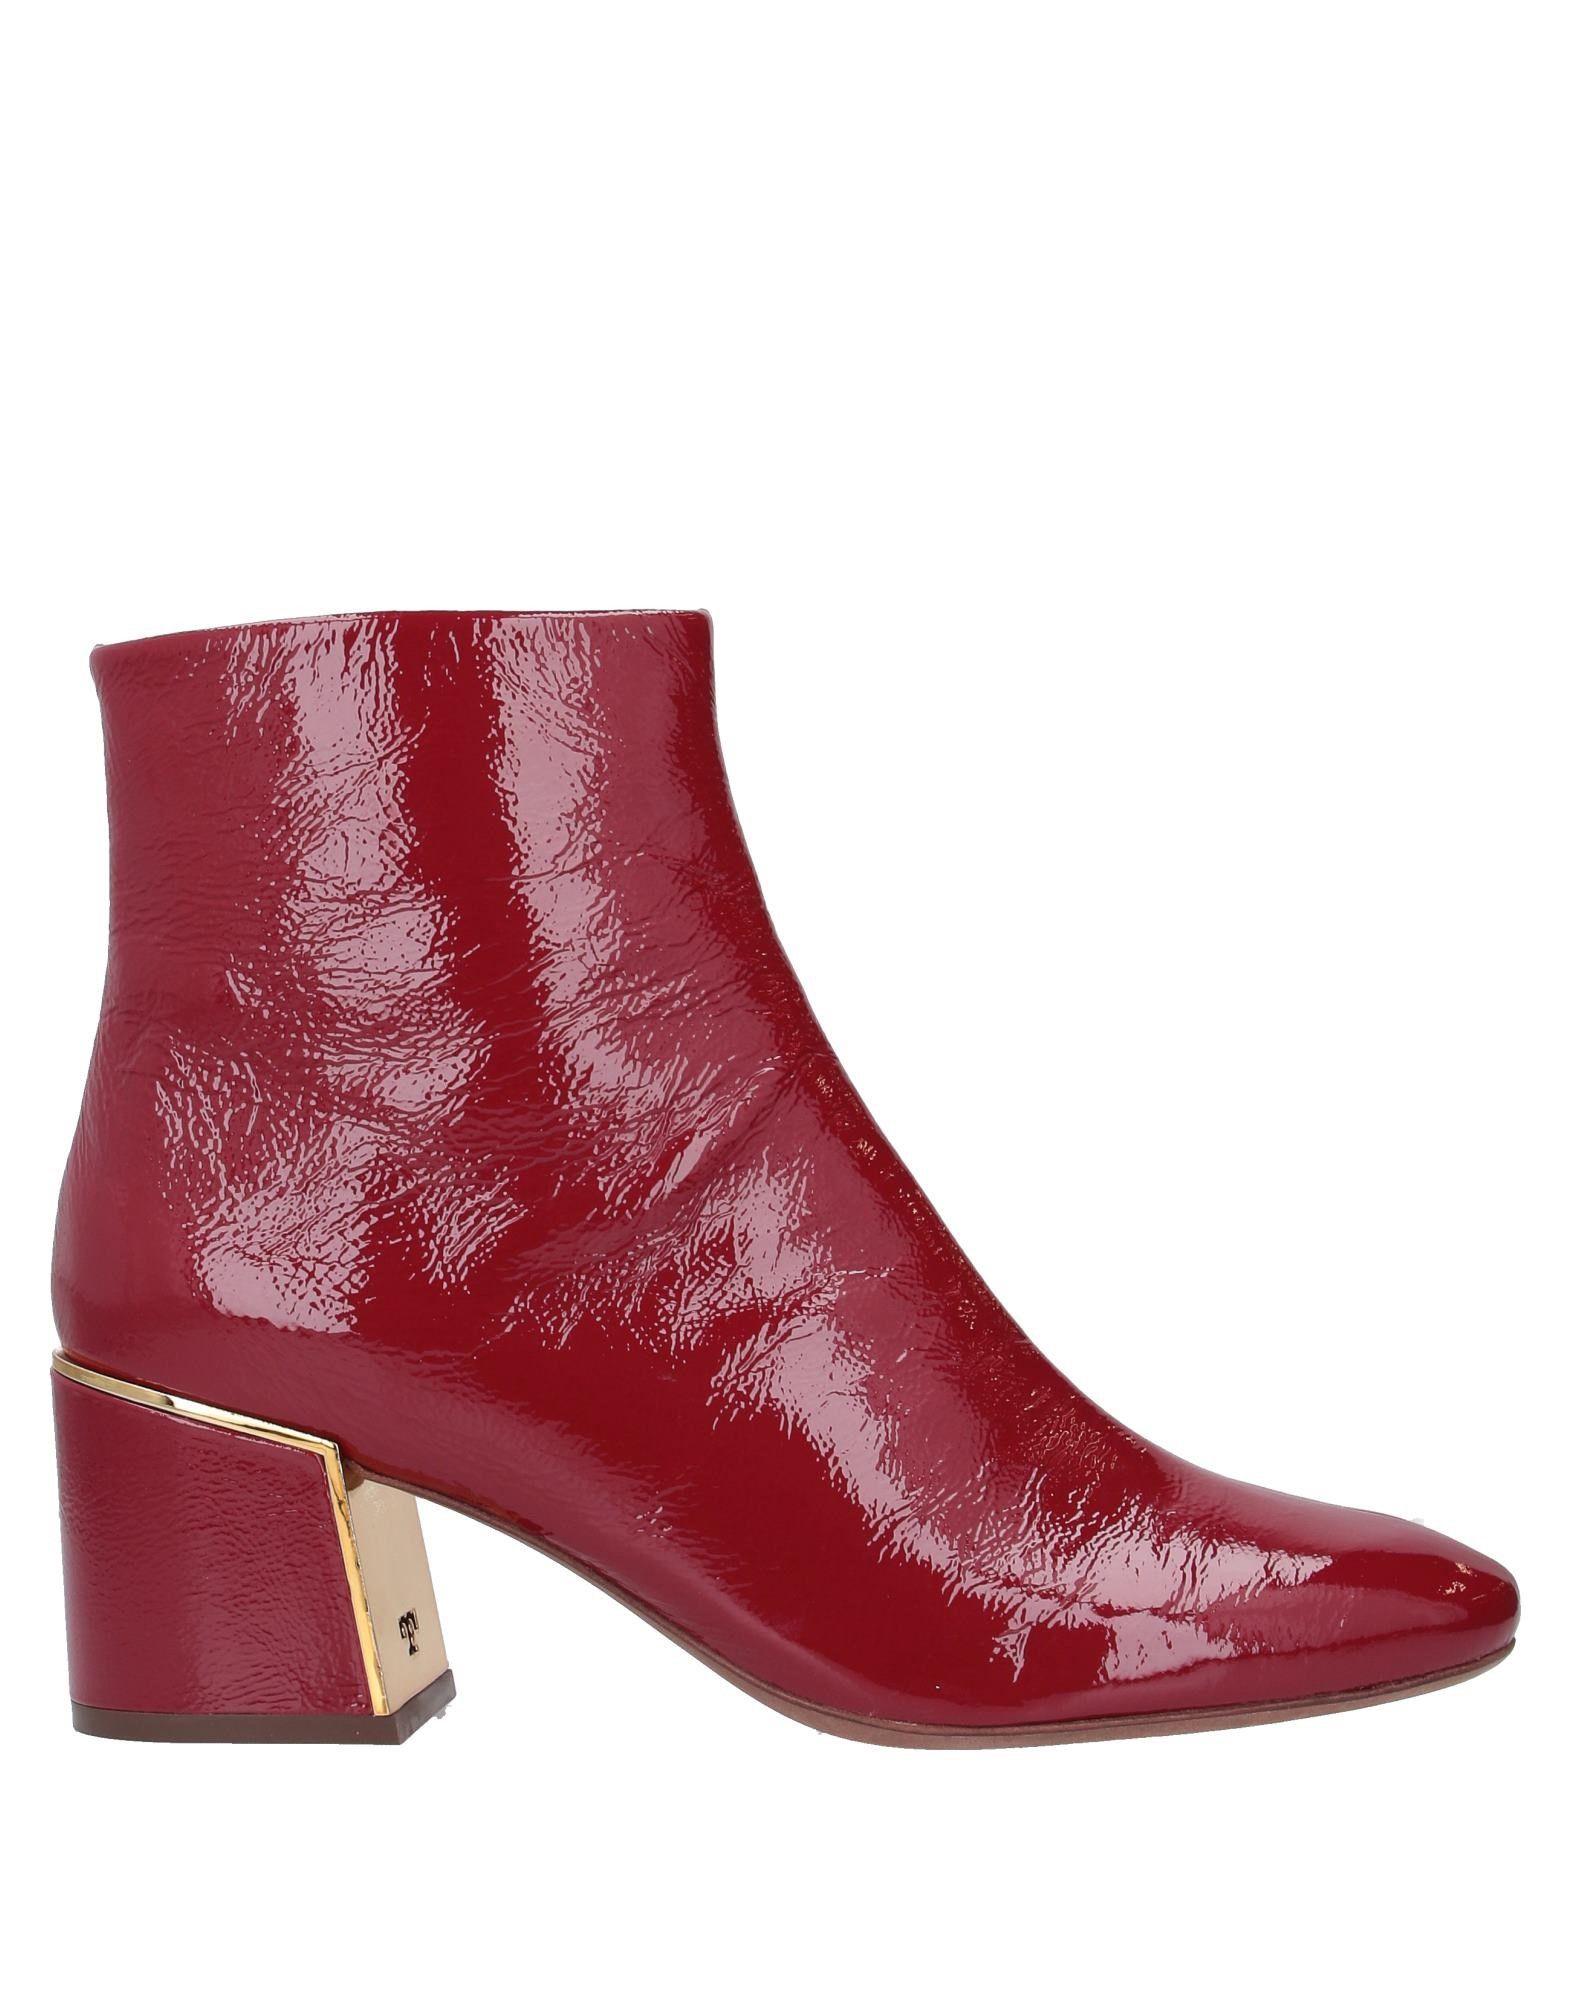 Tory Burch Ankle Boots in Red - Lyst